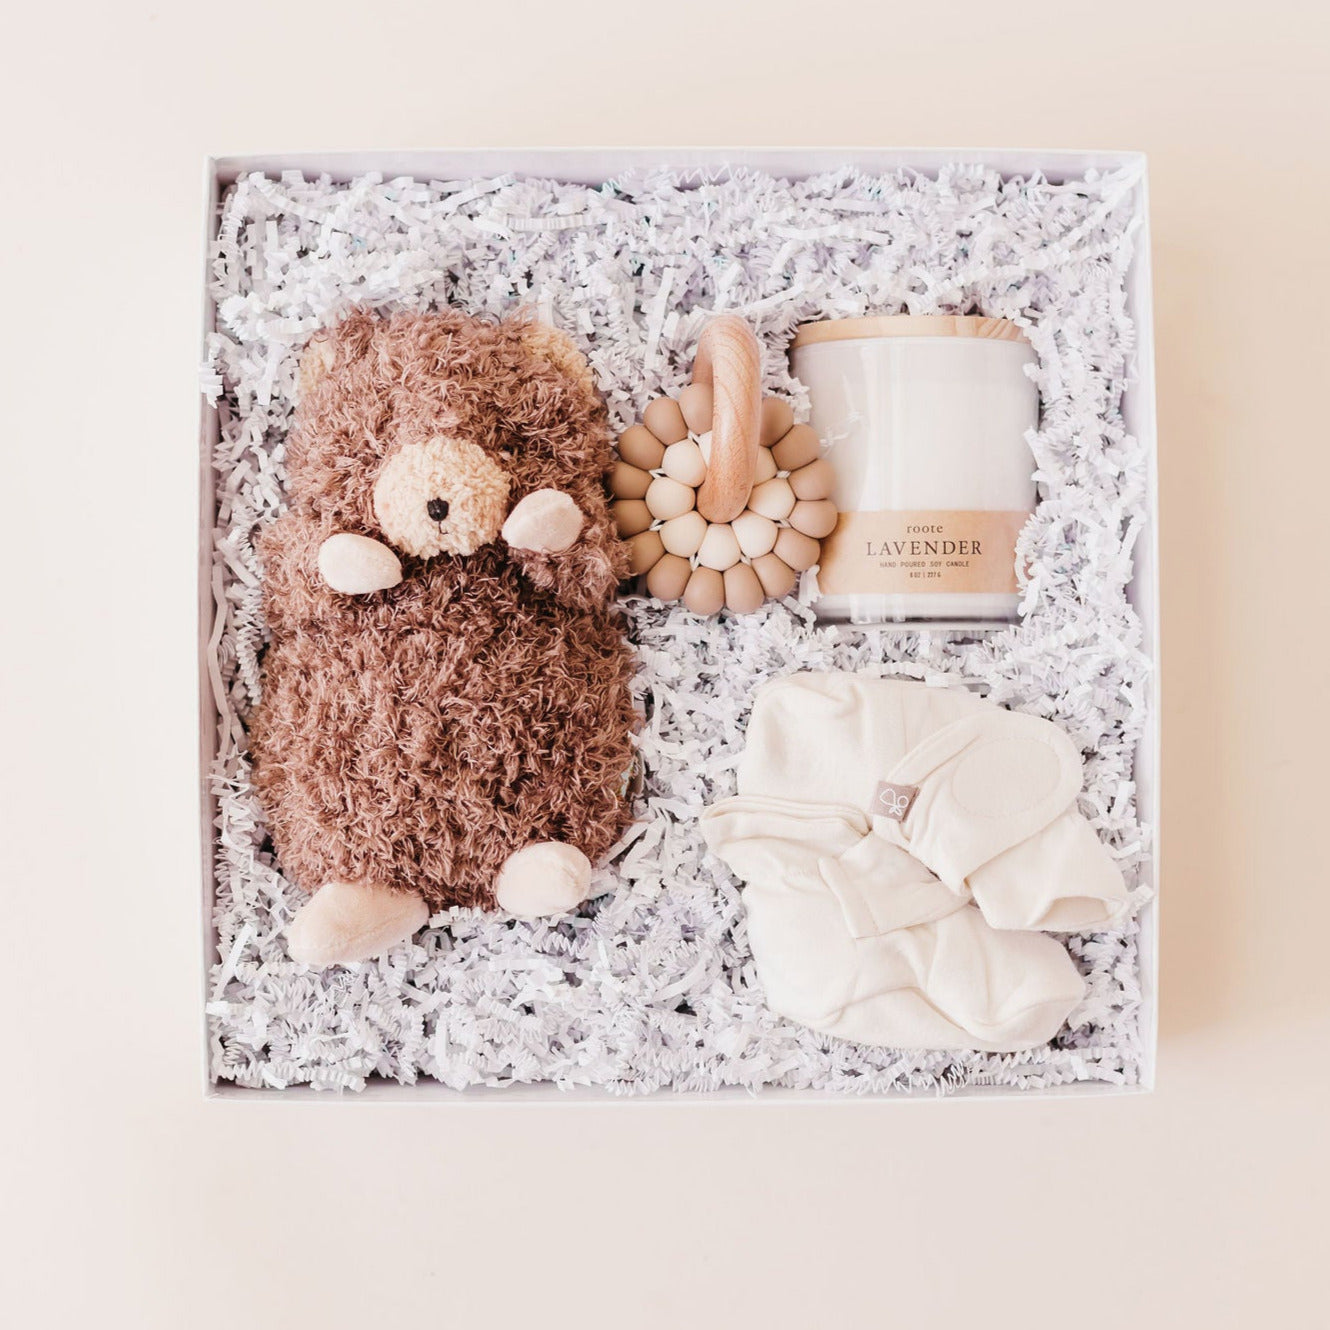 Gifts for Mom and Baby - Lavender & Pine Gifting - Lavender and Pine Gifting